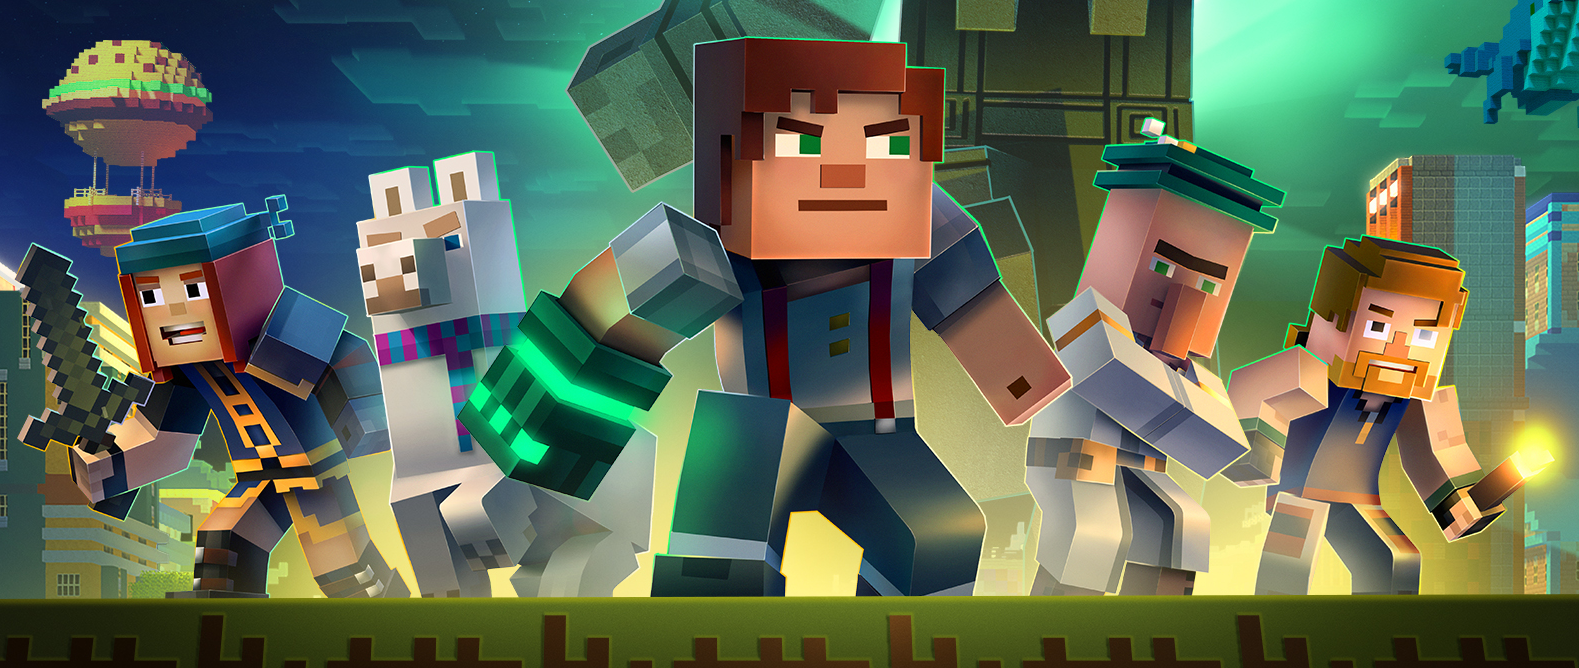 Image for Minecraft: Story Mode - Season 2's premiere episode Hero In Residence releases in July